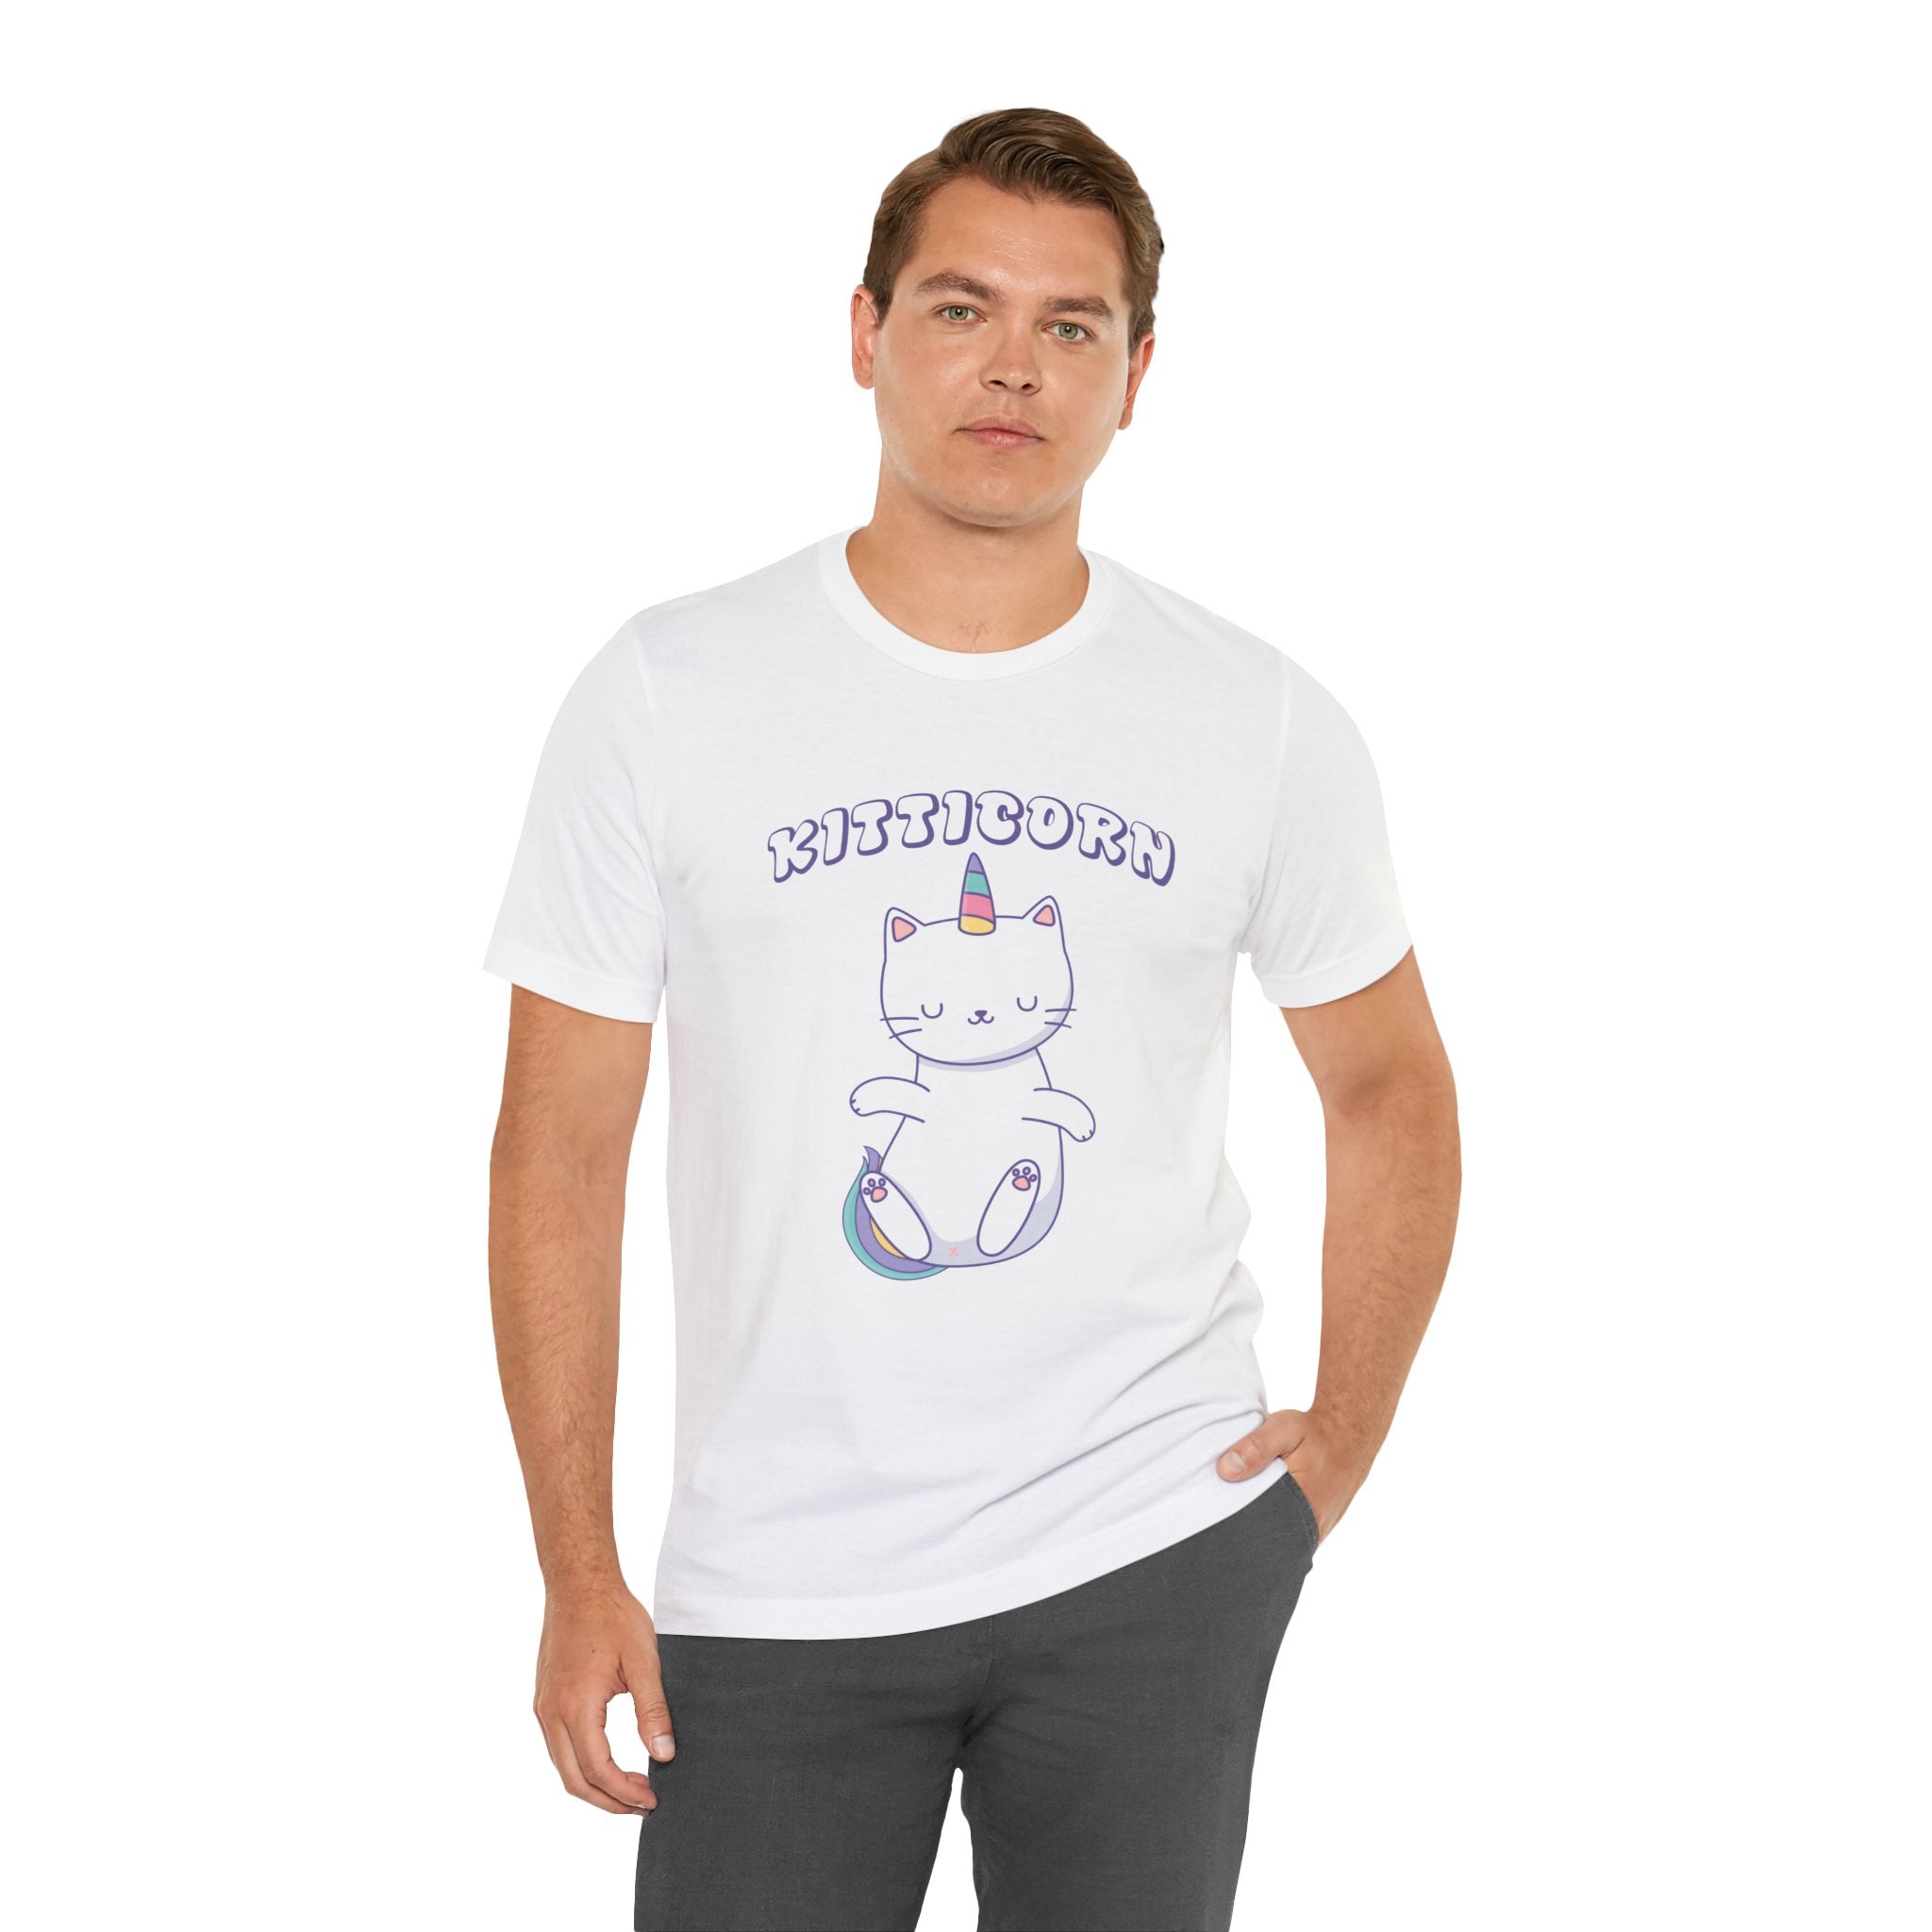 Sentence with product name: Man standing, wearing a white unisex jersey tee with a "Kitticorn" graphic of a cat with a unicorn horn, against a plain background.